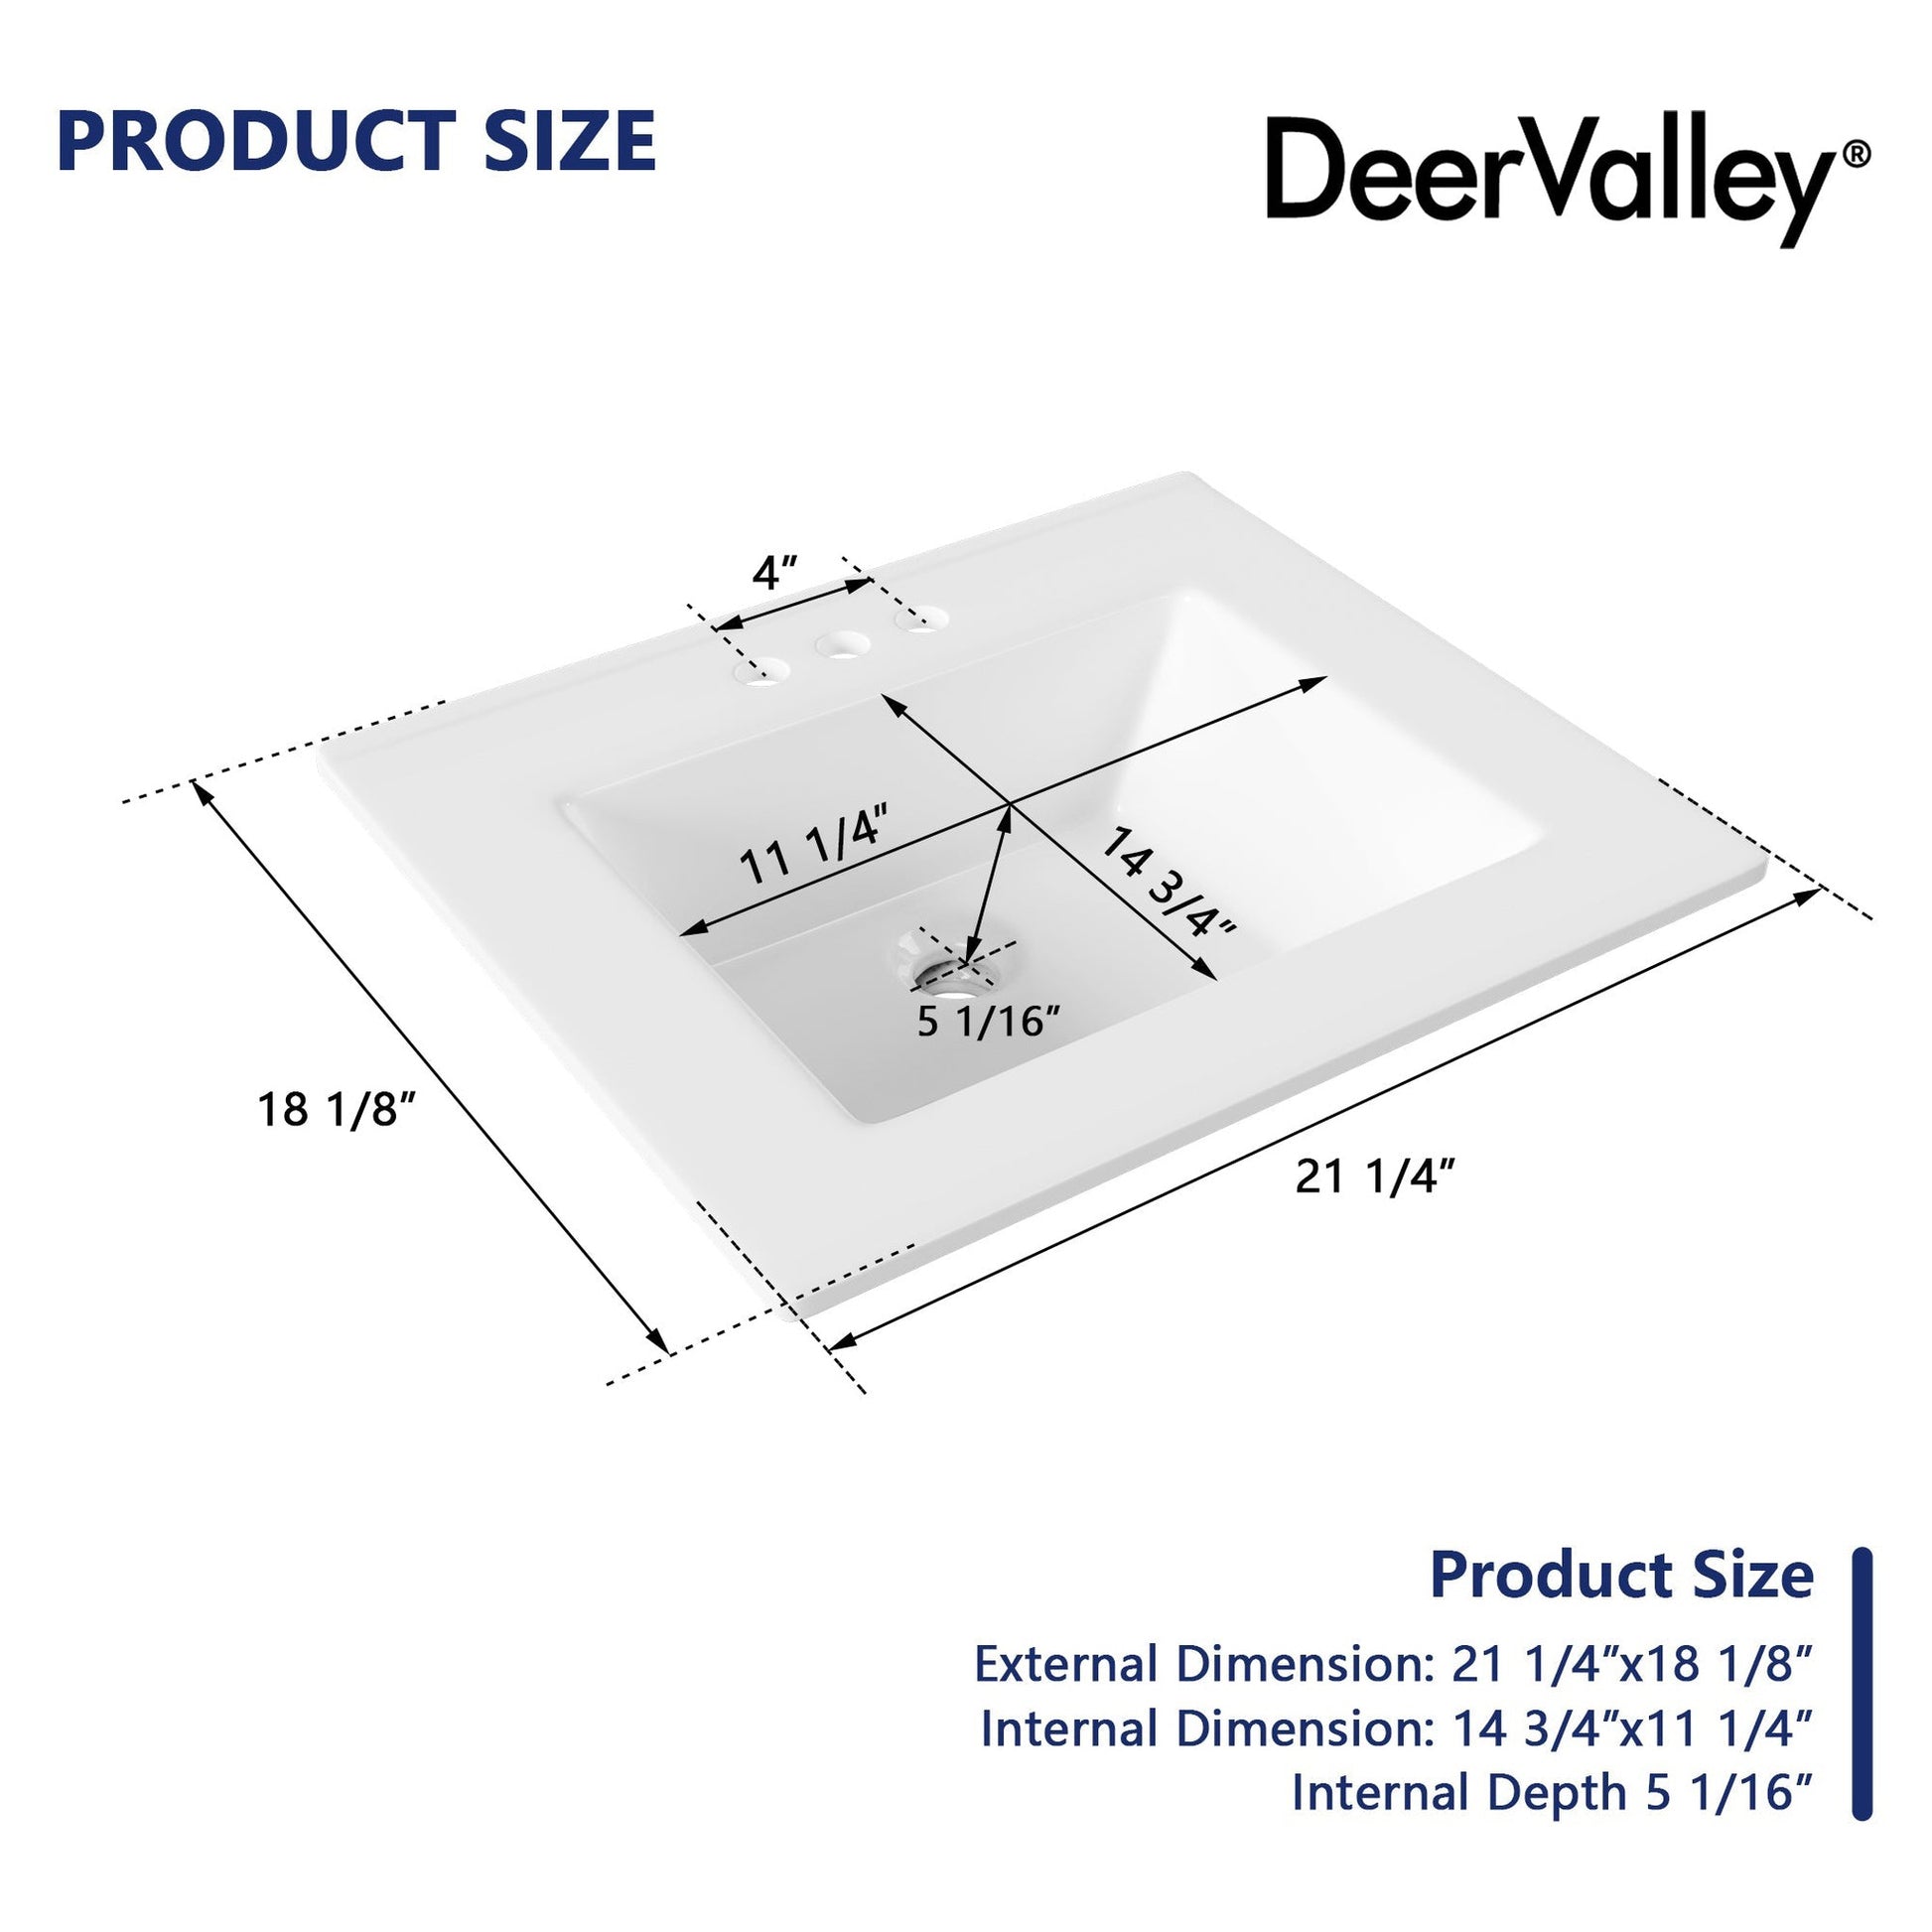 DeerValley DV-1DS0123 18" Rectangular White Drop-in Bathroom Sink With Overflow Hole